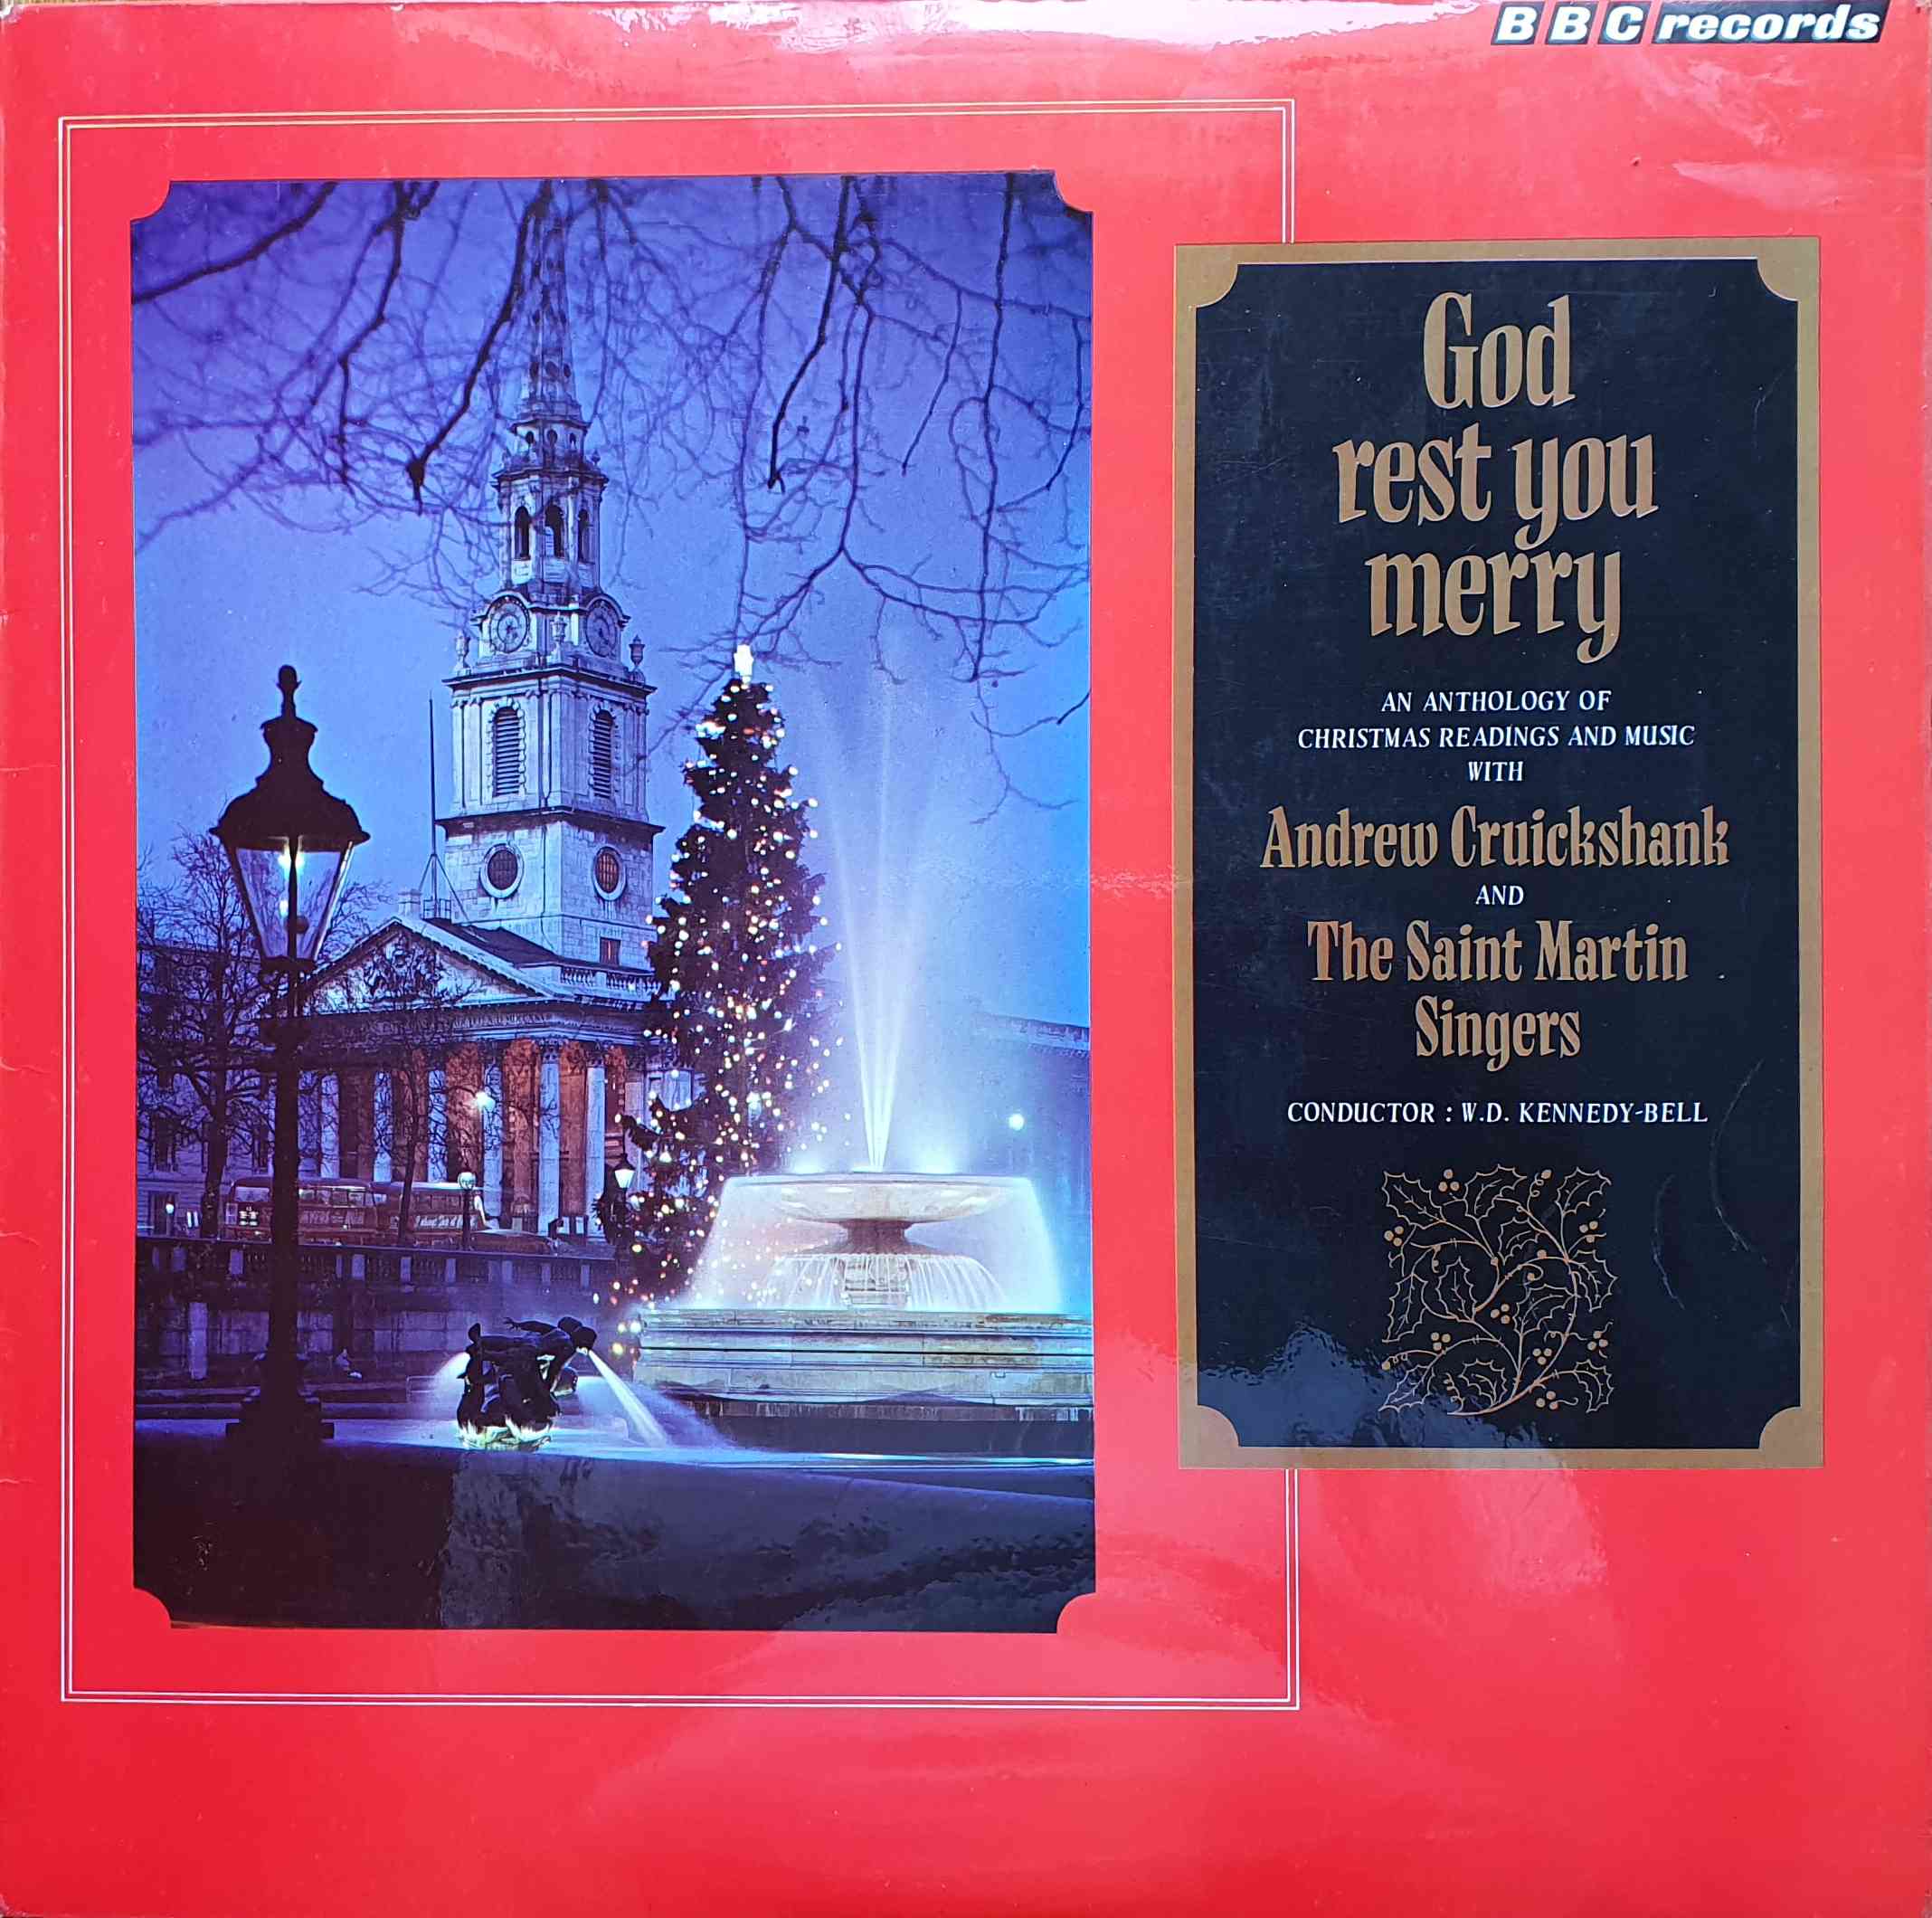 Picture of REC 88 God rest you merry by artist Andrew Cruickshank / The Saint Martin Singers from the BBC albums - Records and Tapes library